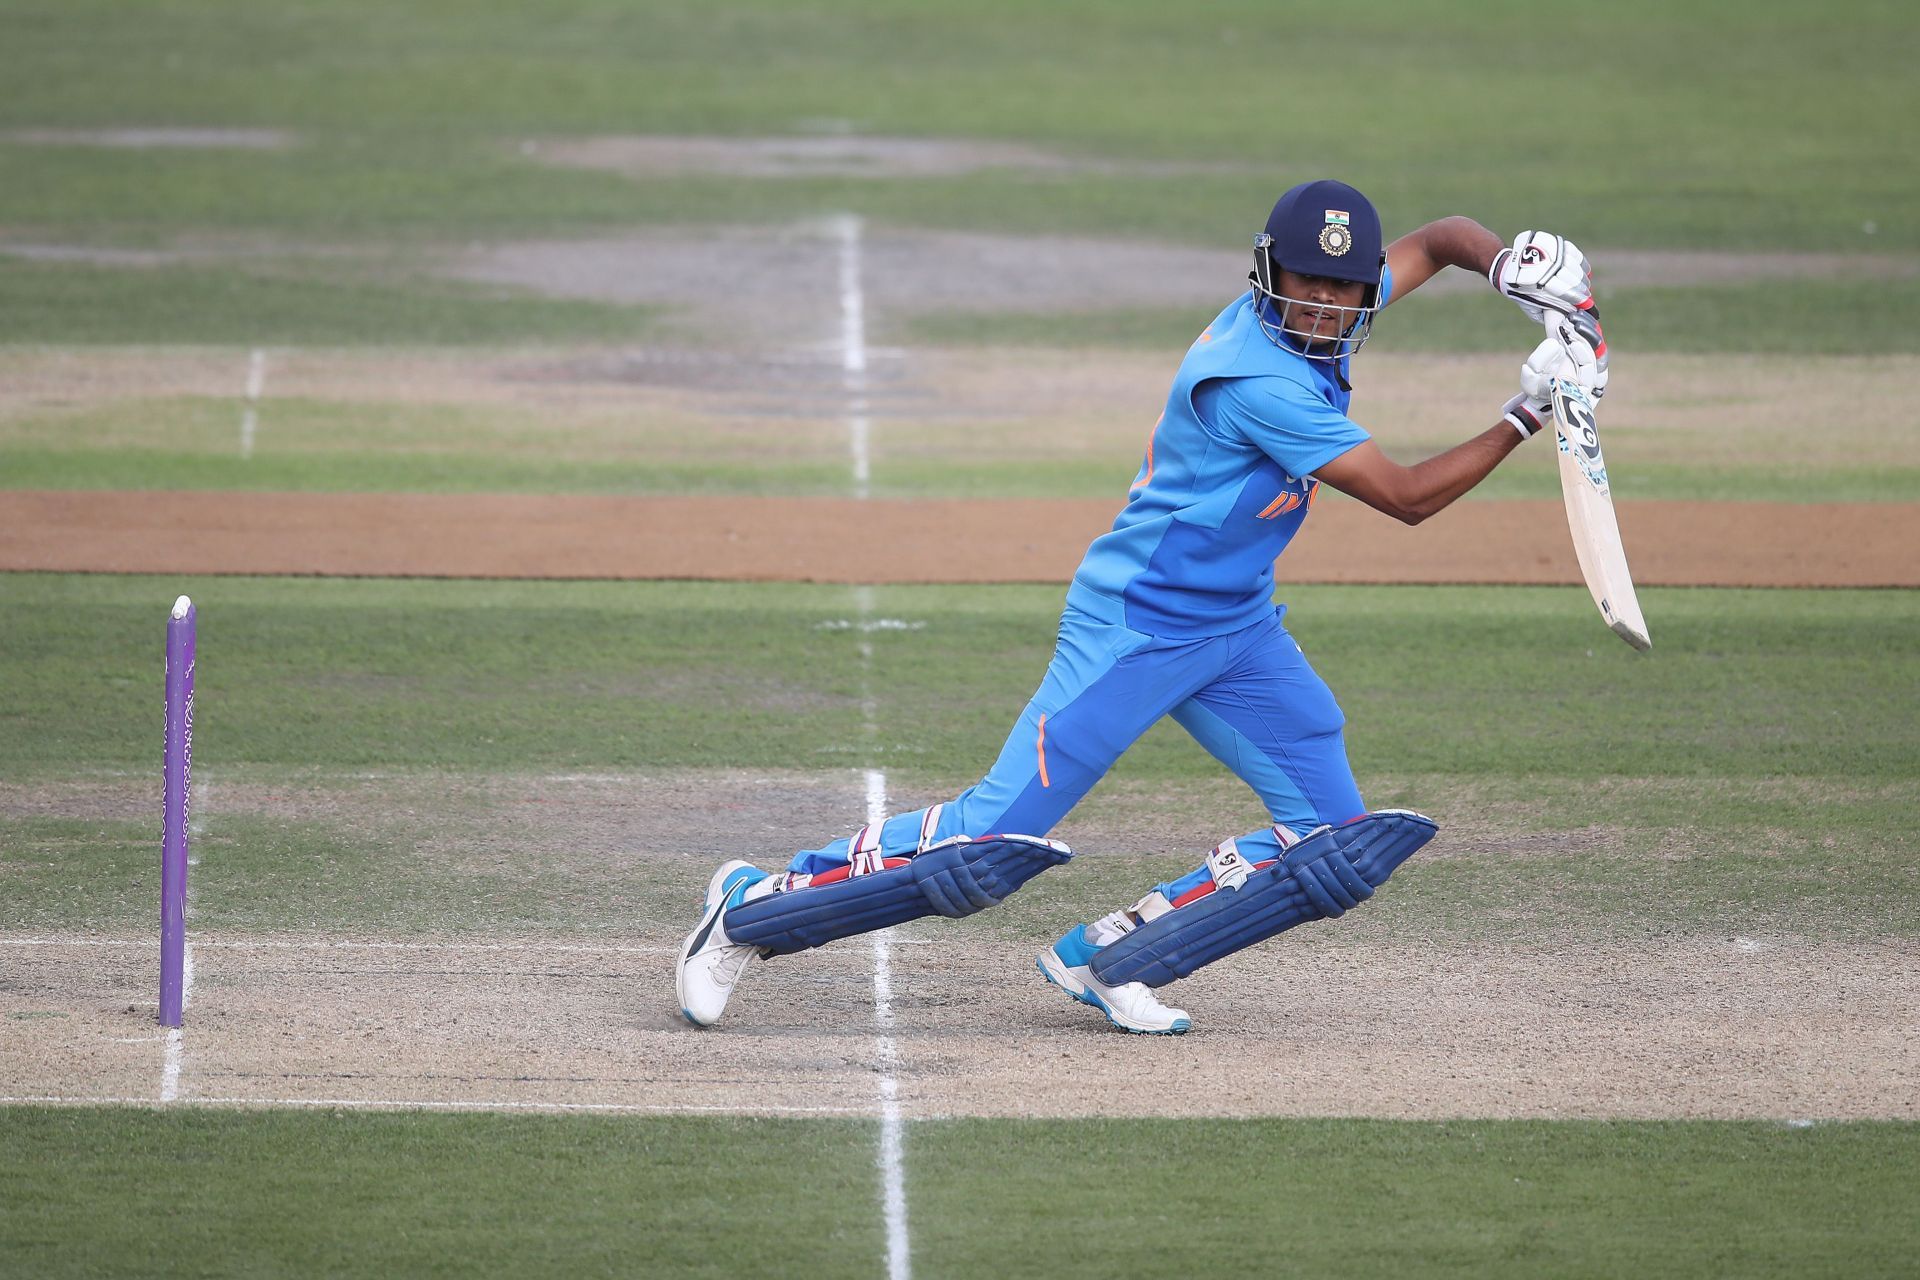 Priyam Garg captained India in the 2019 U19 World Cup